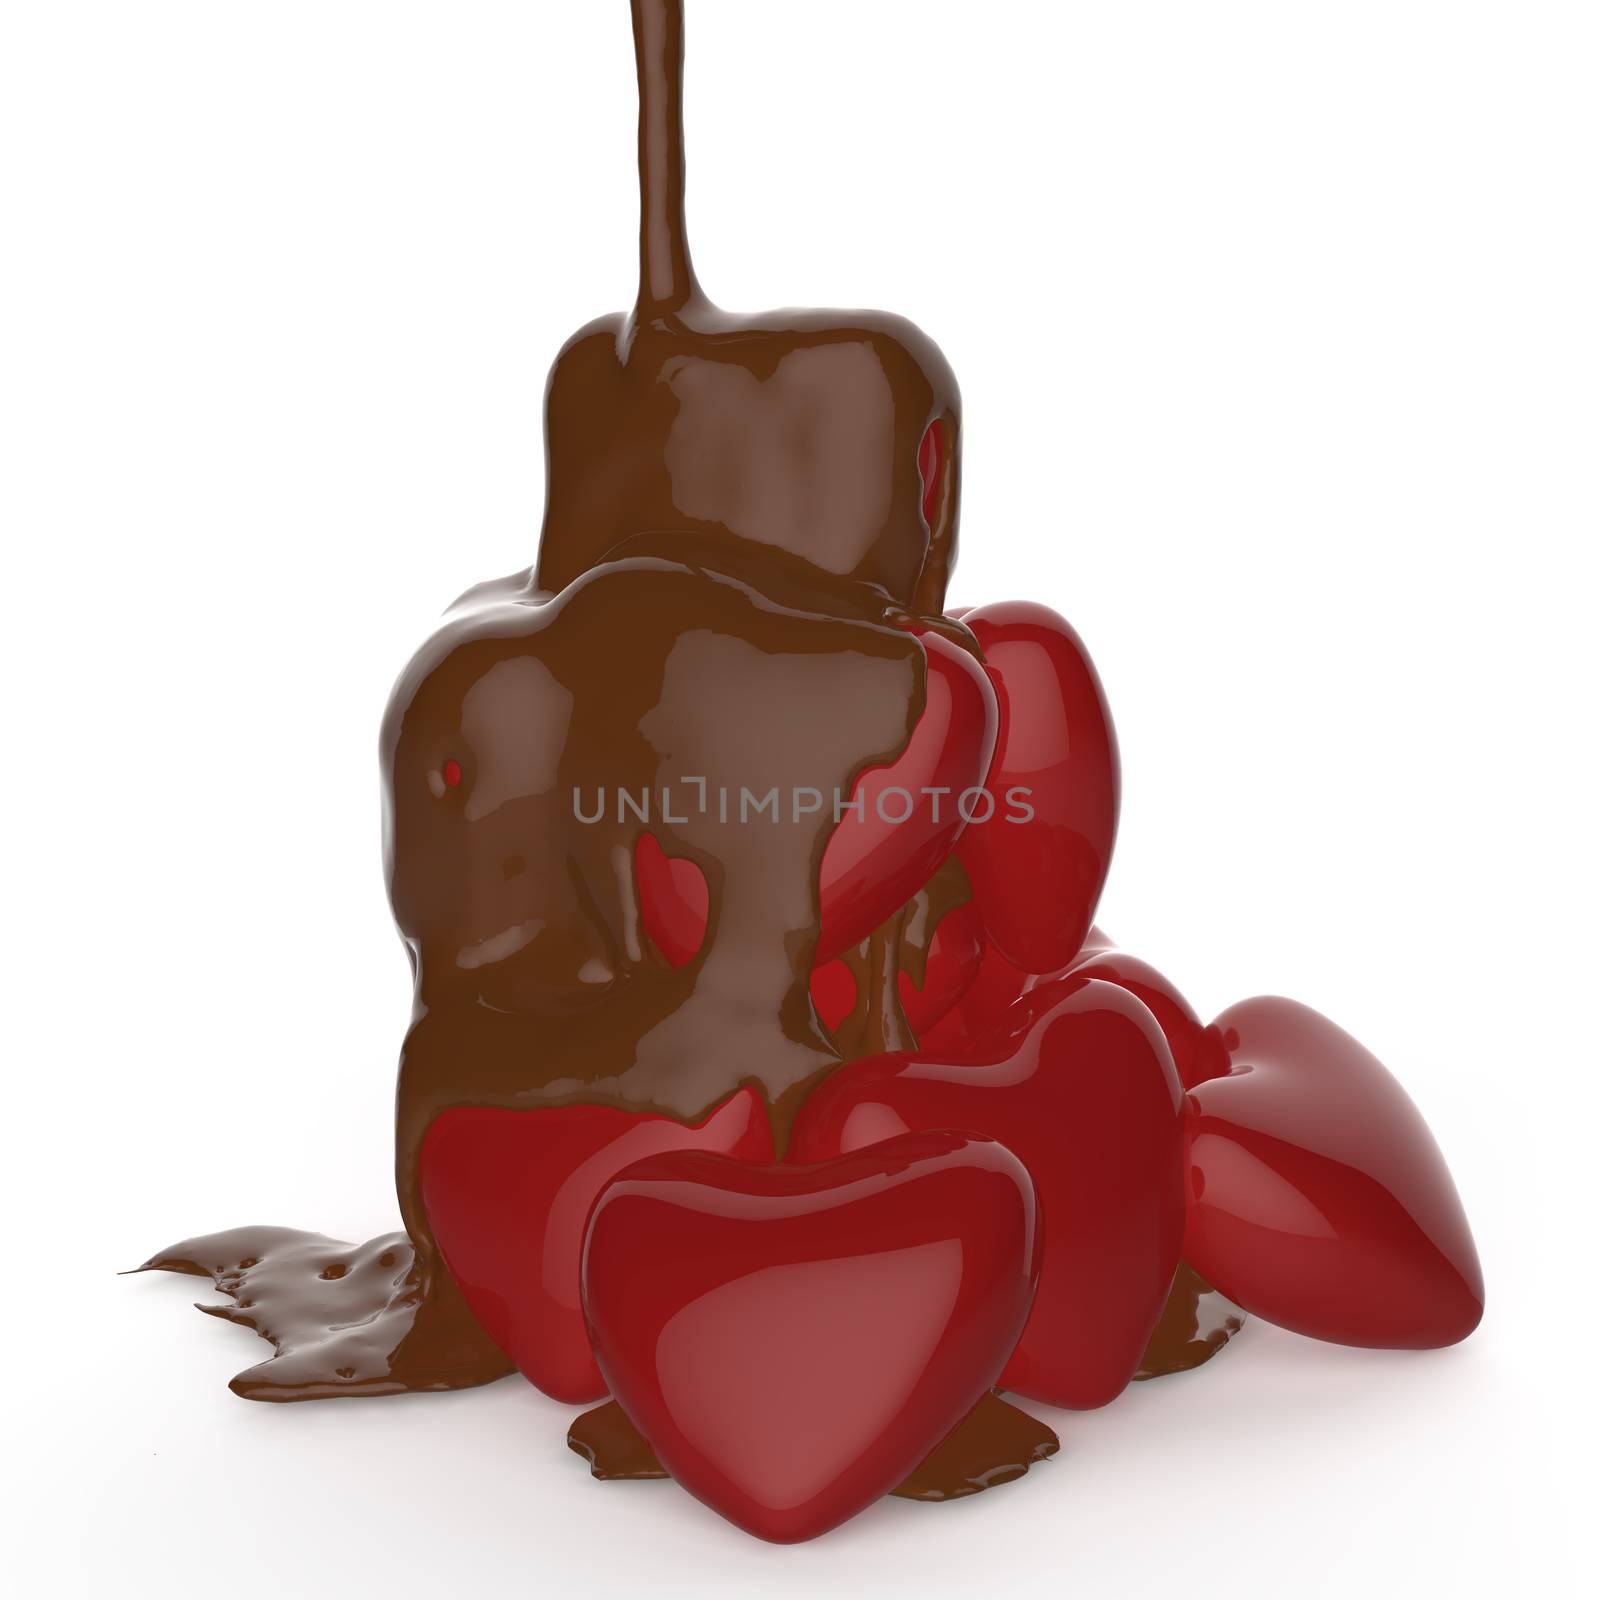  chocolate syrup leaking over heart shape symbol by everythingpossible